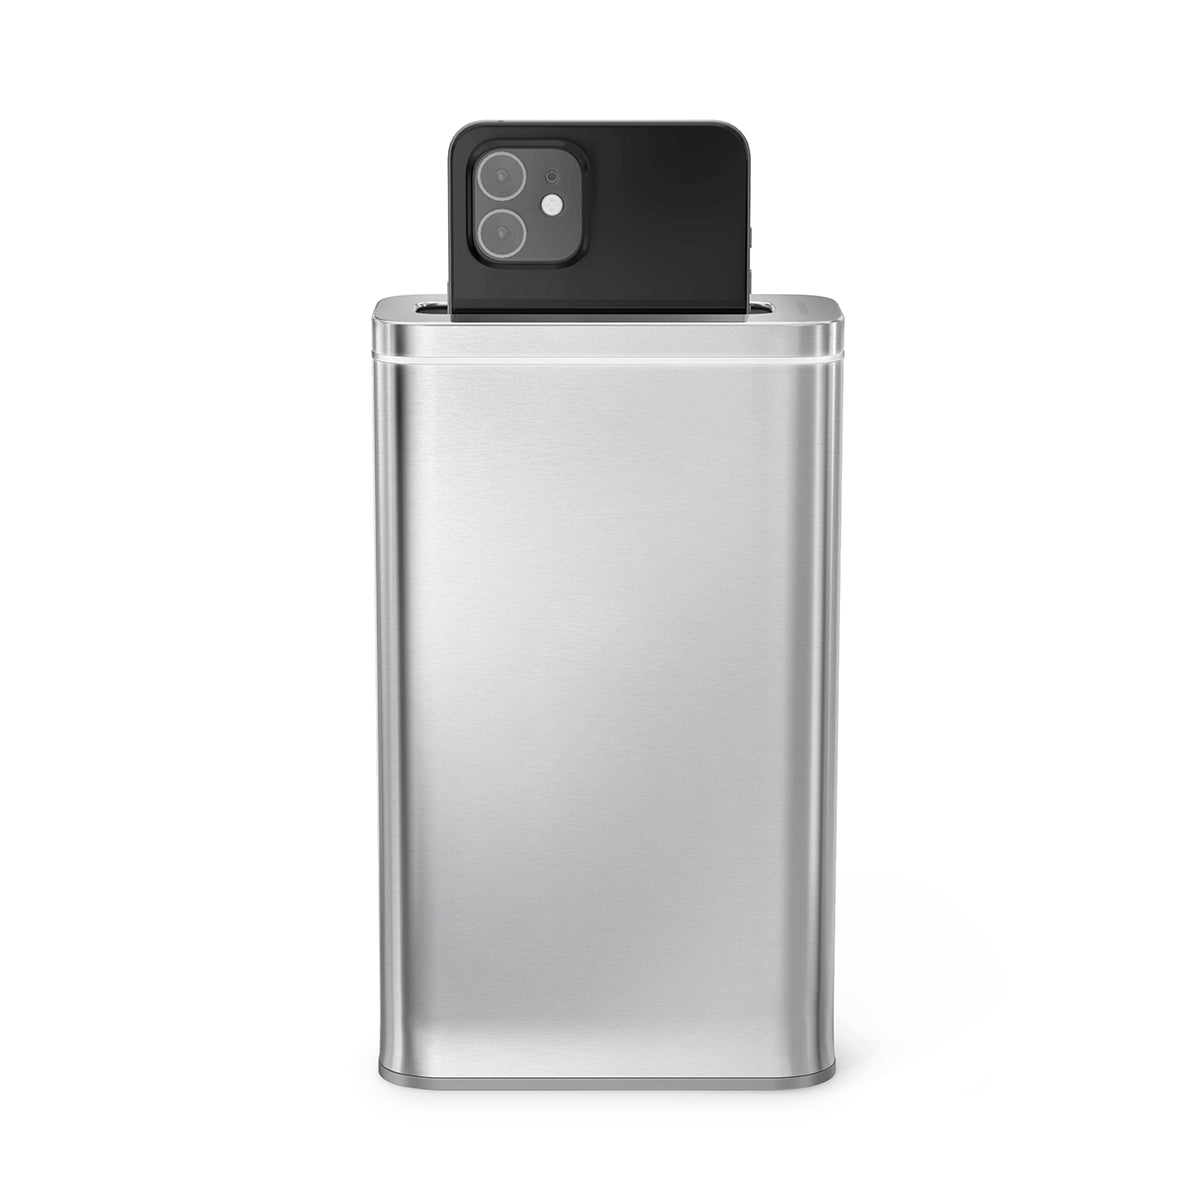 simplehuman cleanstation, brushed stainless steel